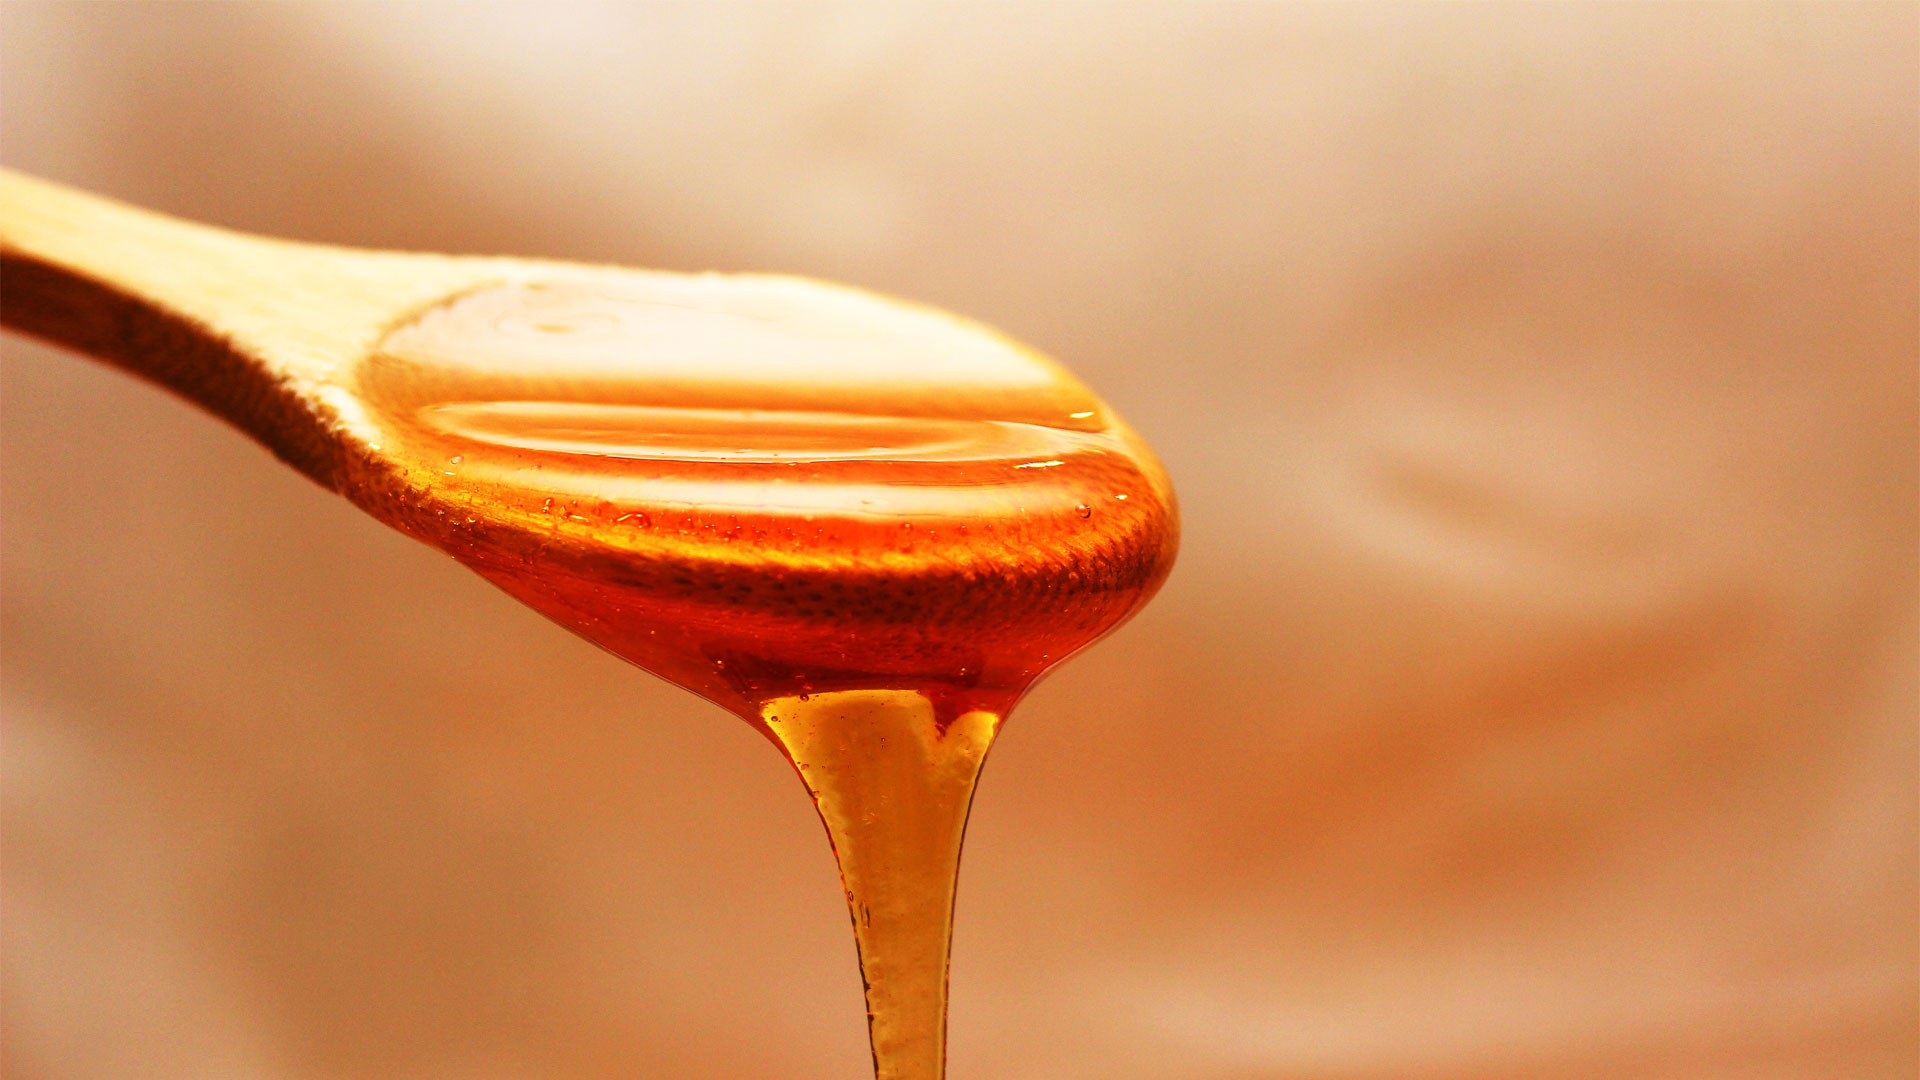 Effects of honey and sugar dressings on wound healing